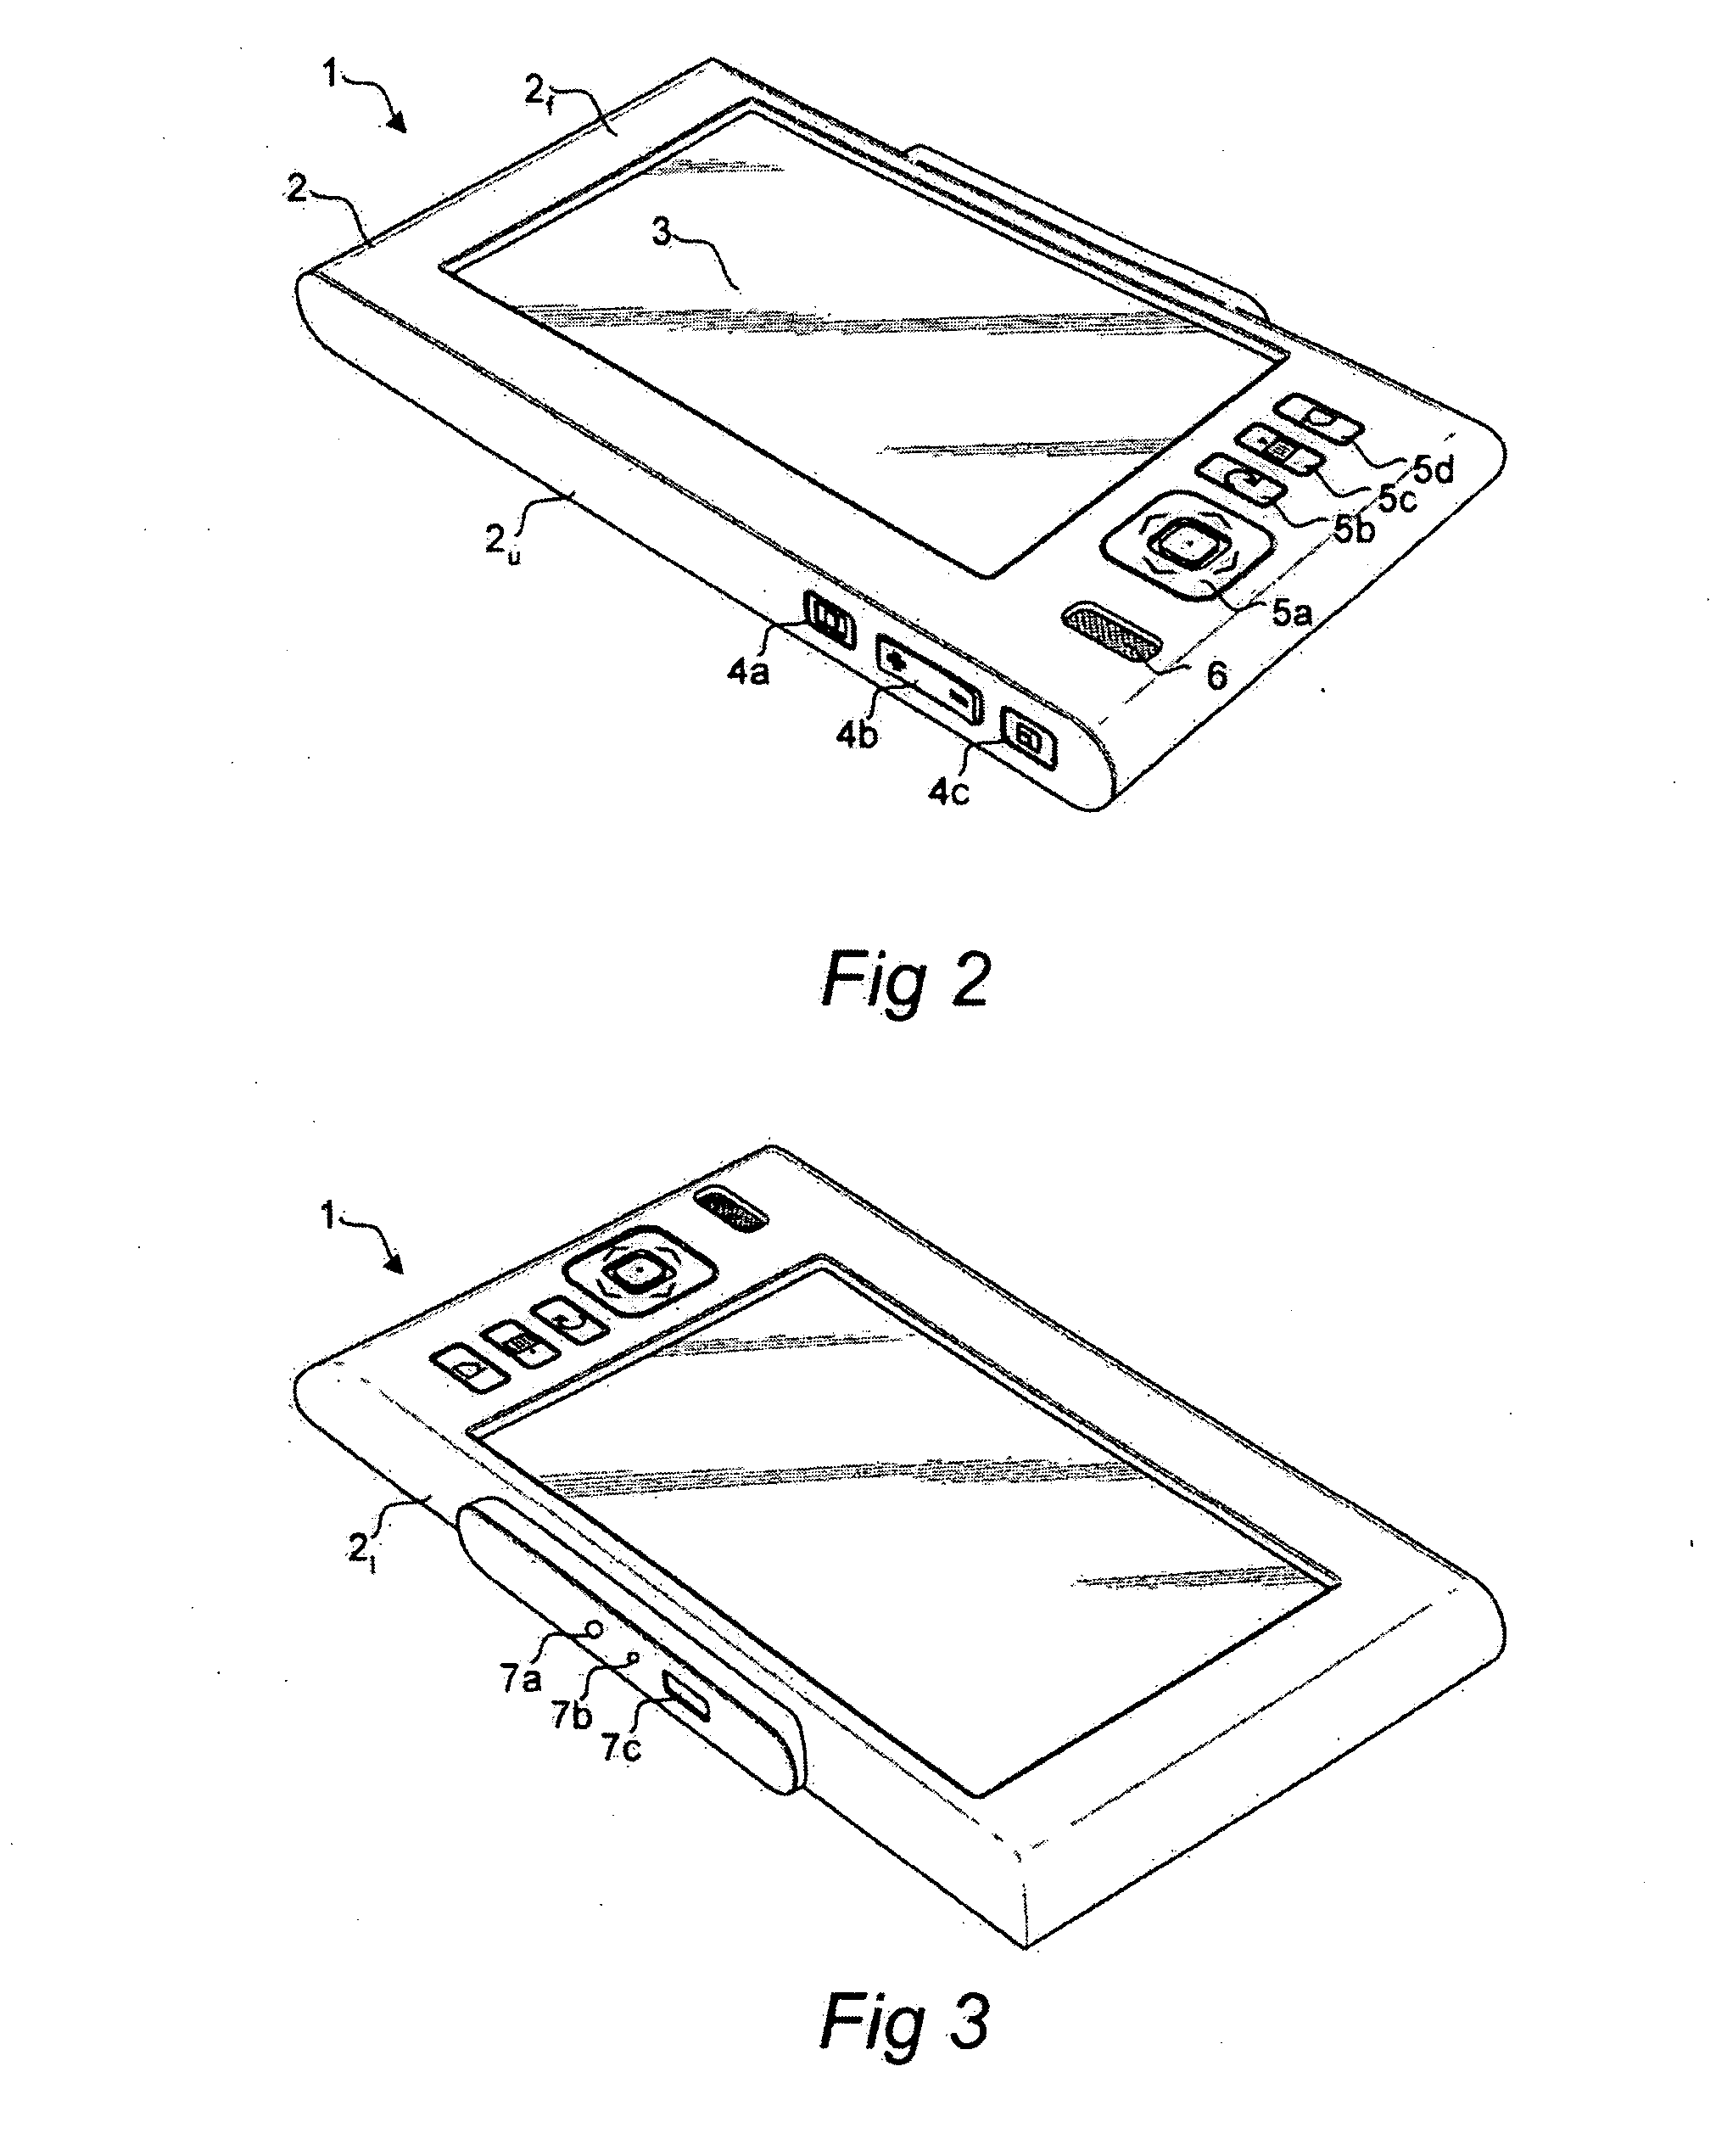 Electronic text input involving a virtual keyboard and word completion functionality on a touch-sensitive display screen